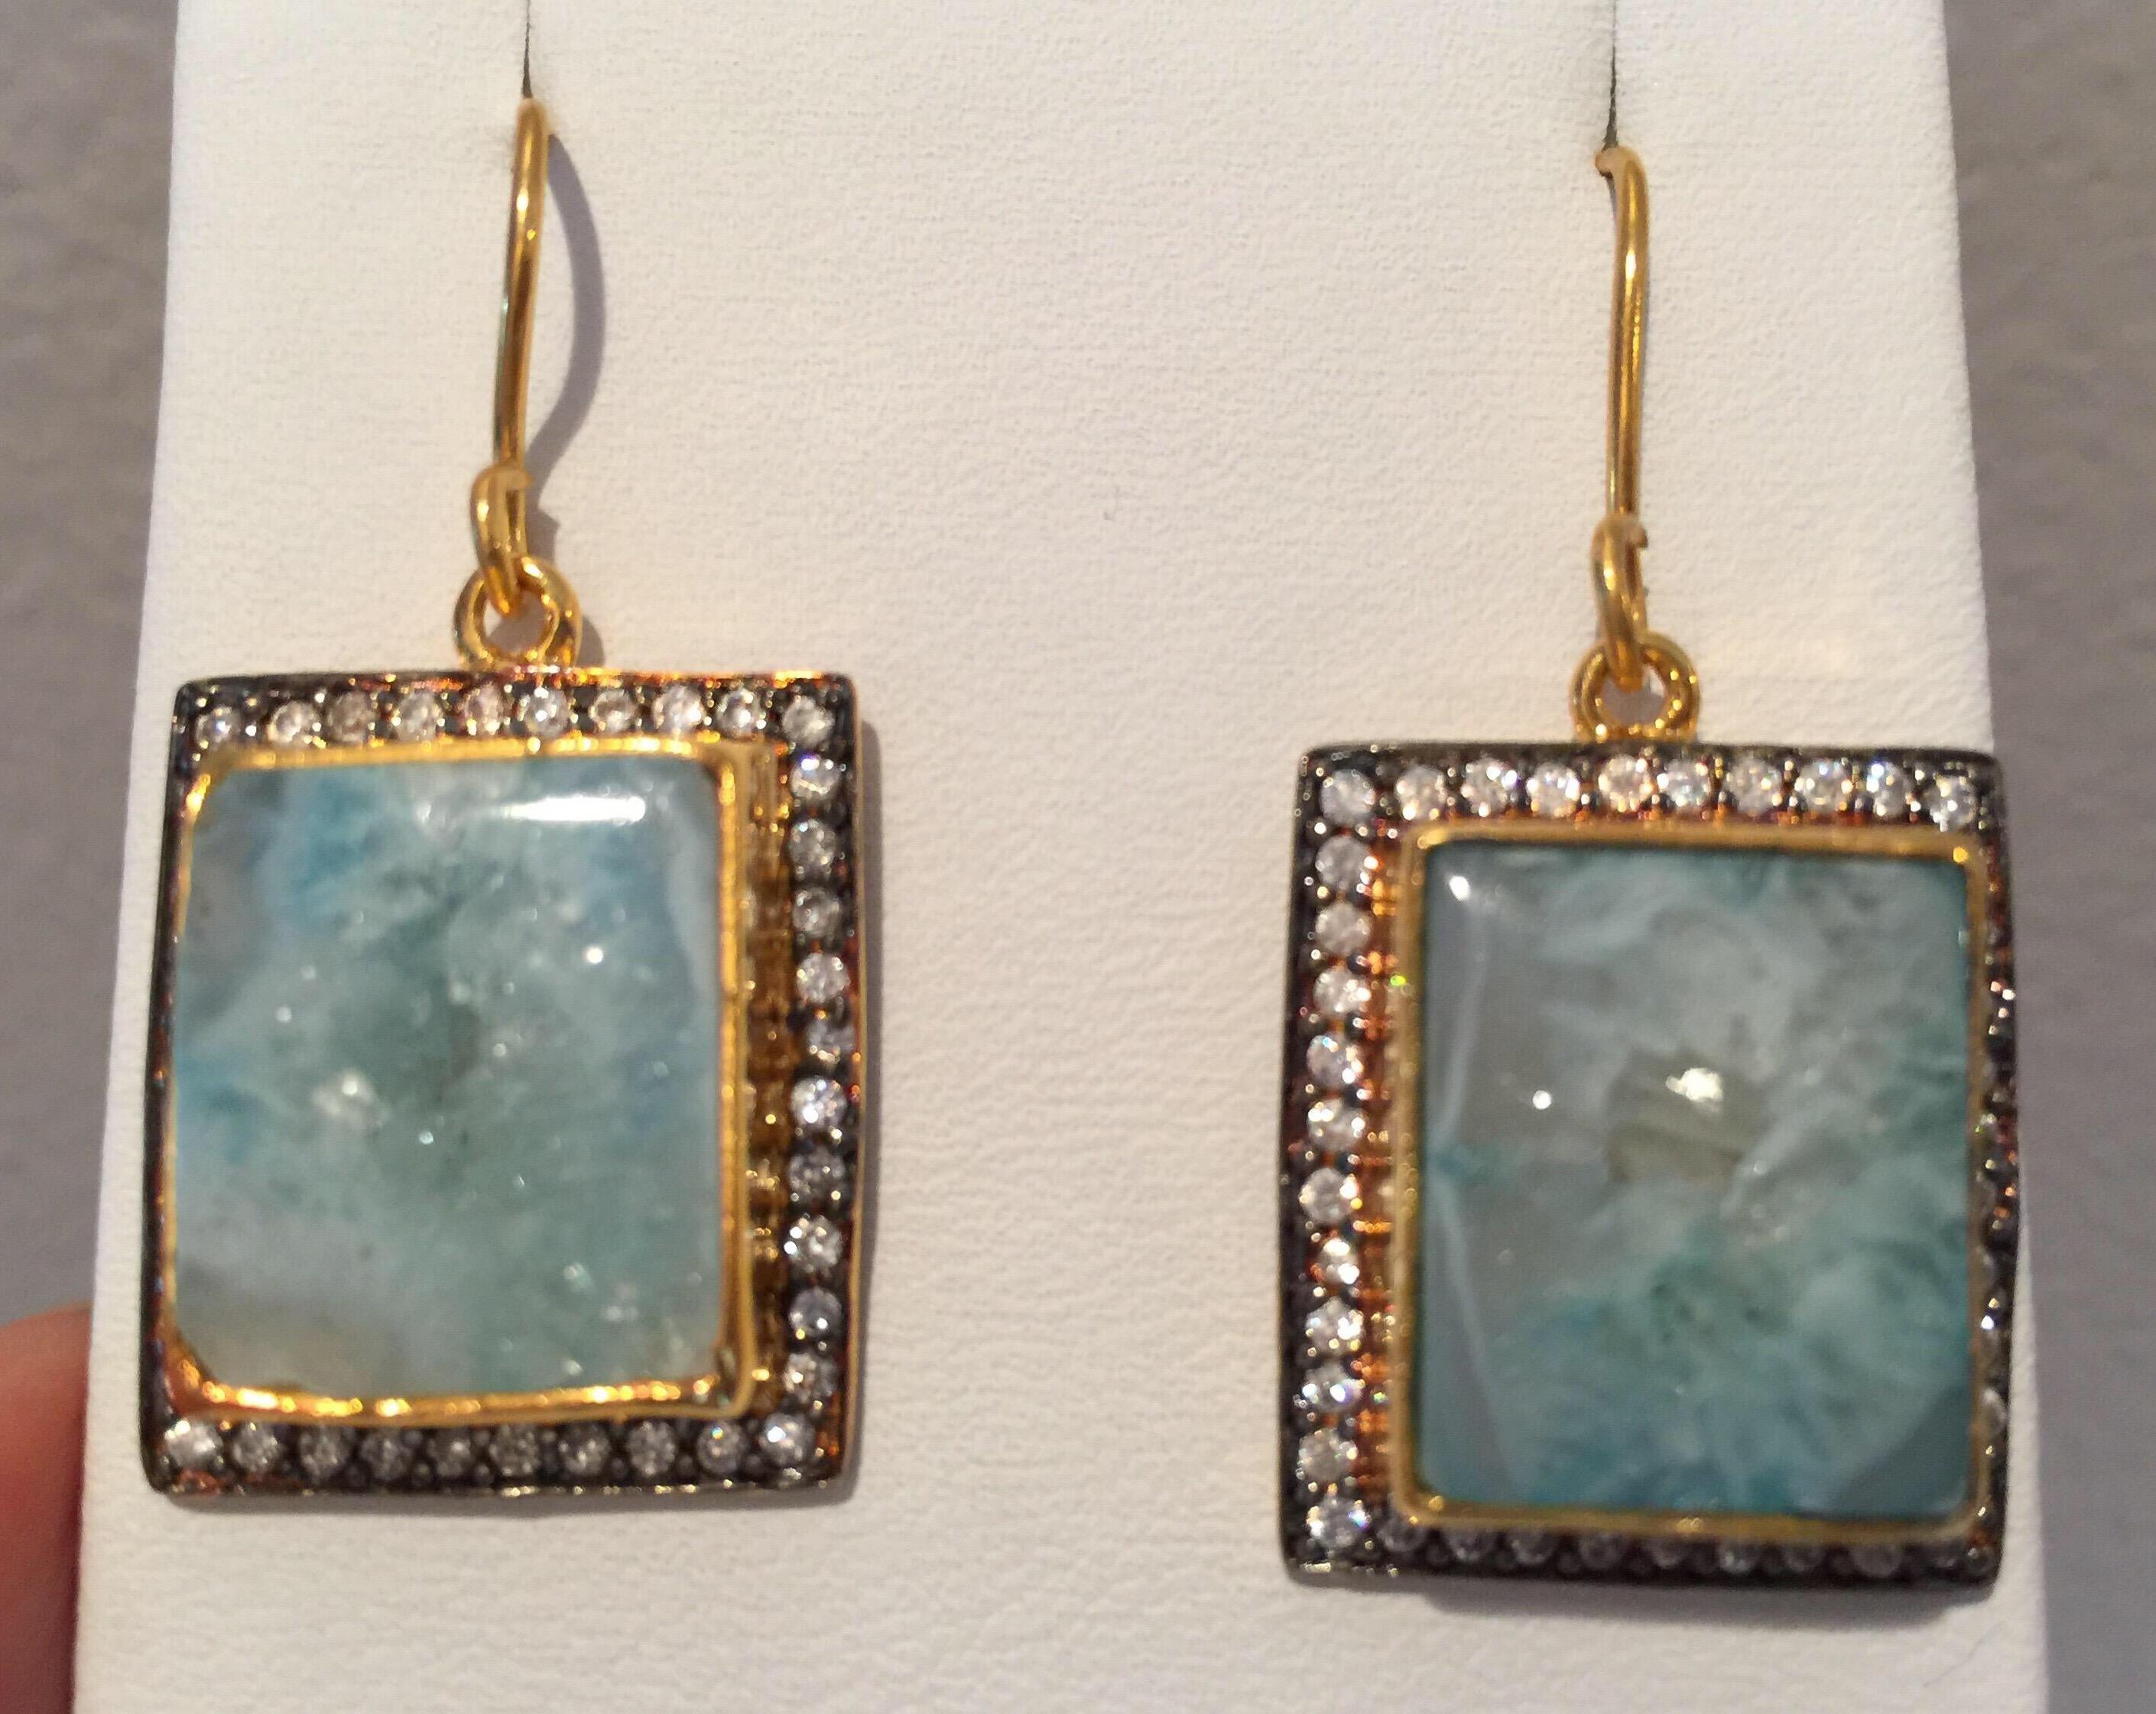 Single drop druzy earrings features slice geode in aqua blue.  Embellished with cubic zircon with fish hook closure.  Only 1 available.  18K Gold Plated.

FOLLOW  MEGHNA JEWELS storefront to view the latest collection & exclusive pieces.  Meghna